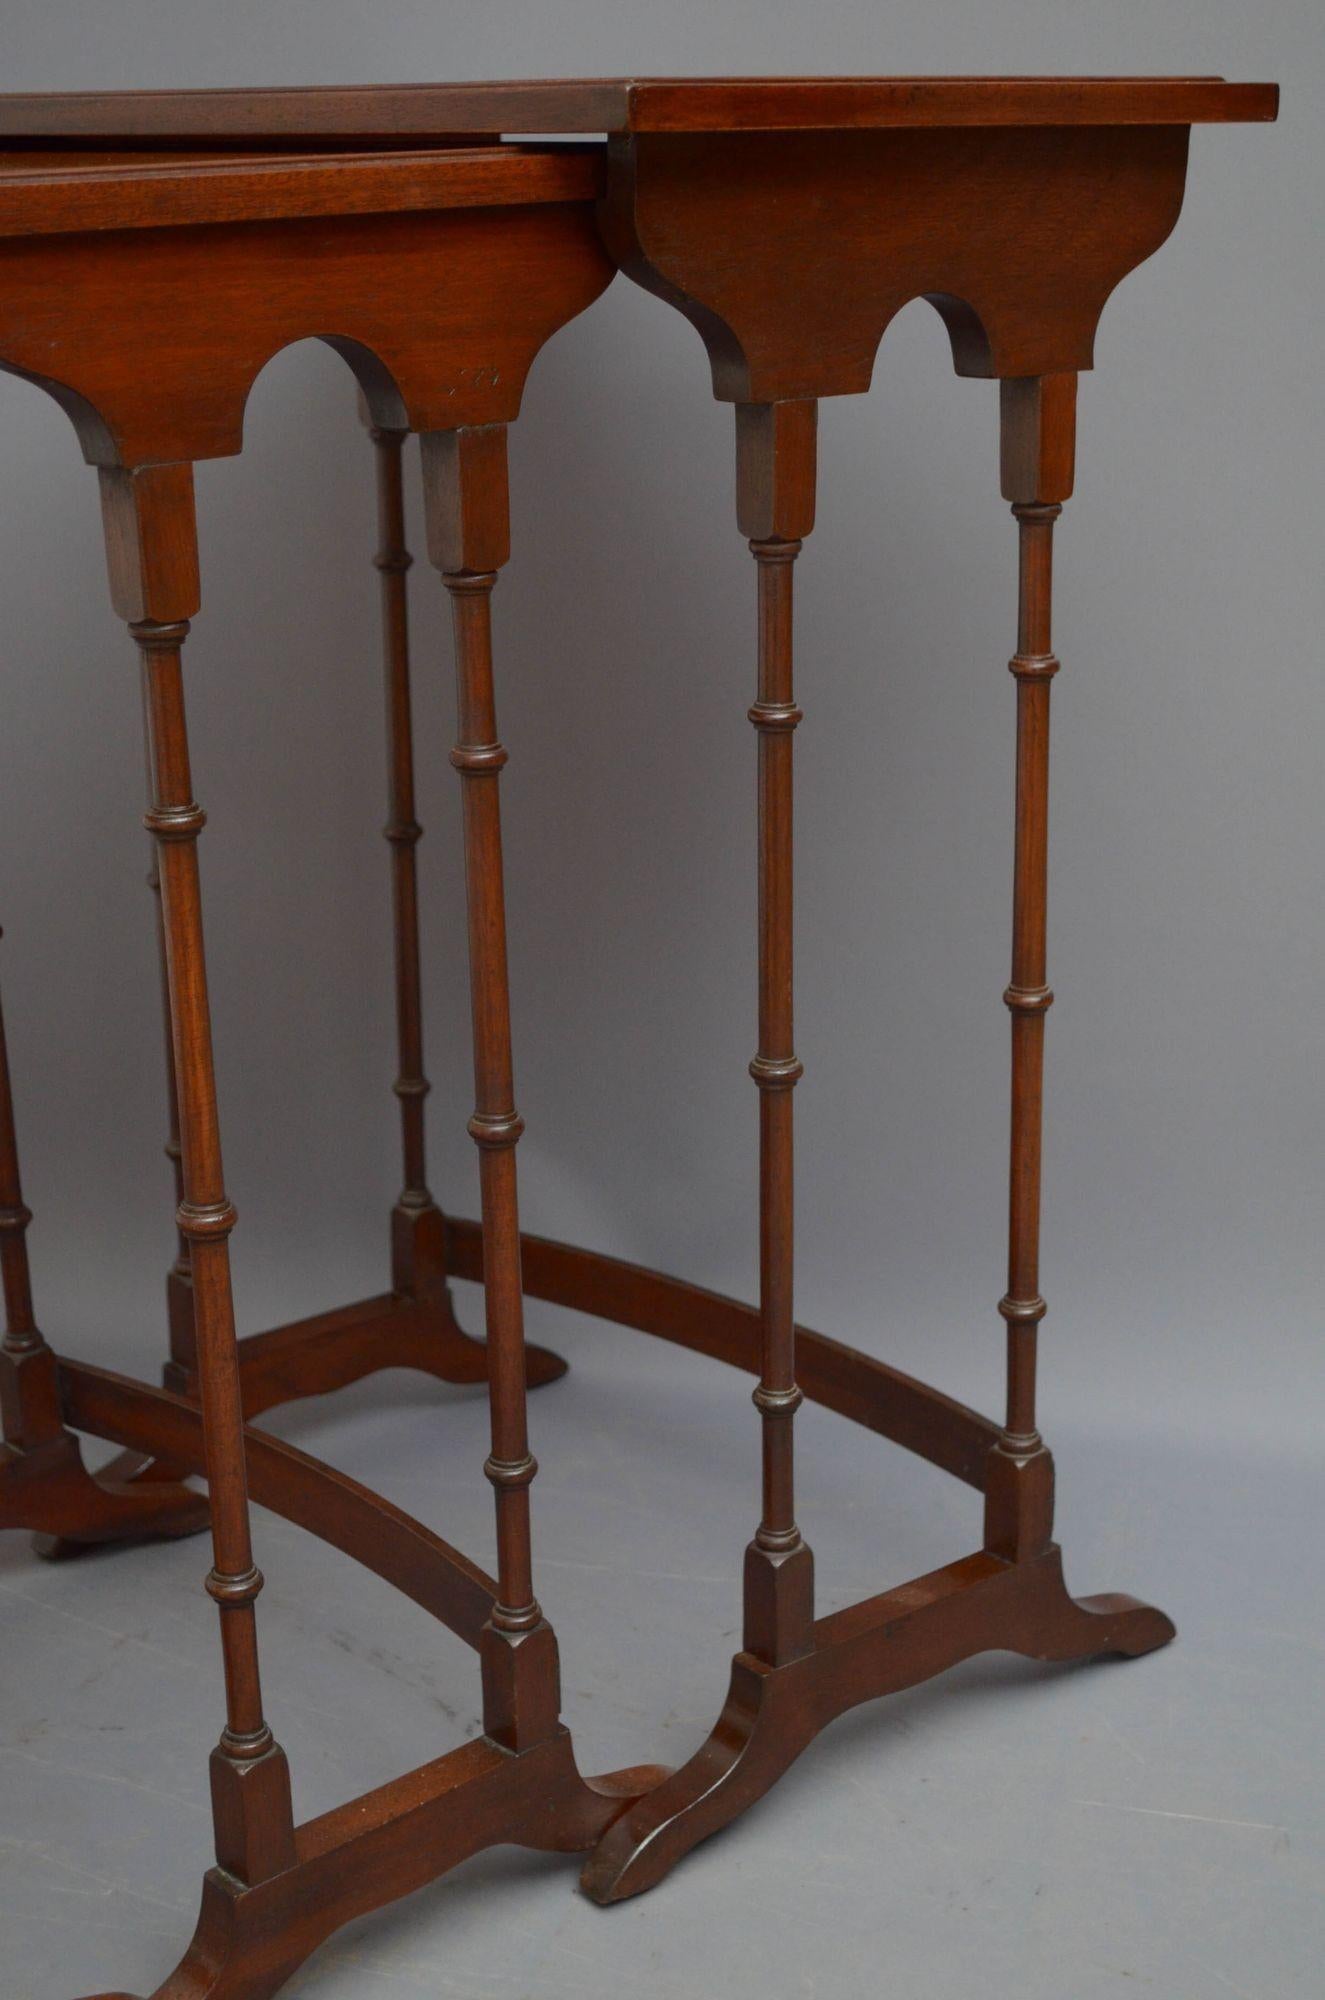 Edwardian Mahogany and Satinwood Nest of Tables For Sale 5